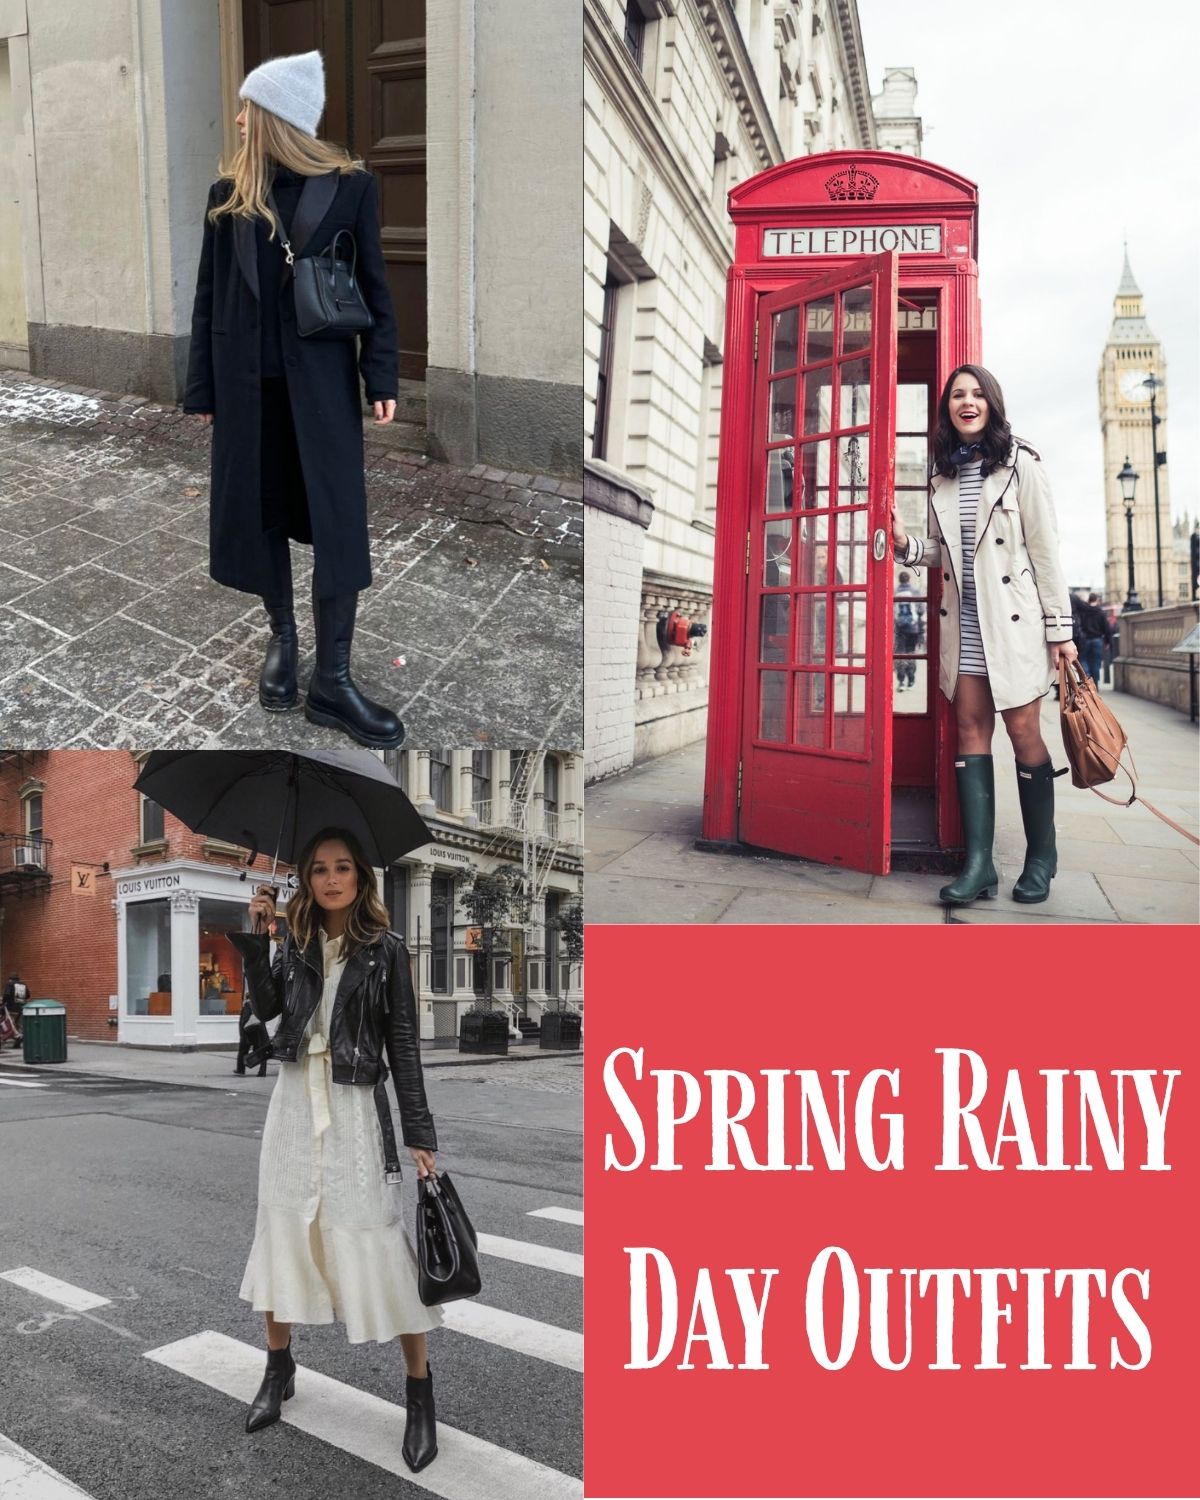 Three aesthetic spring rainy day outfits of girls in the weather